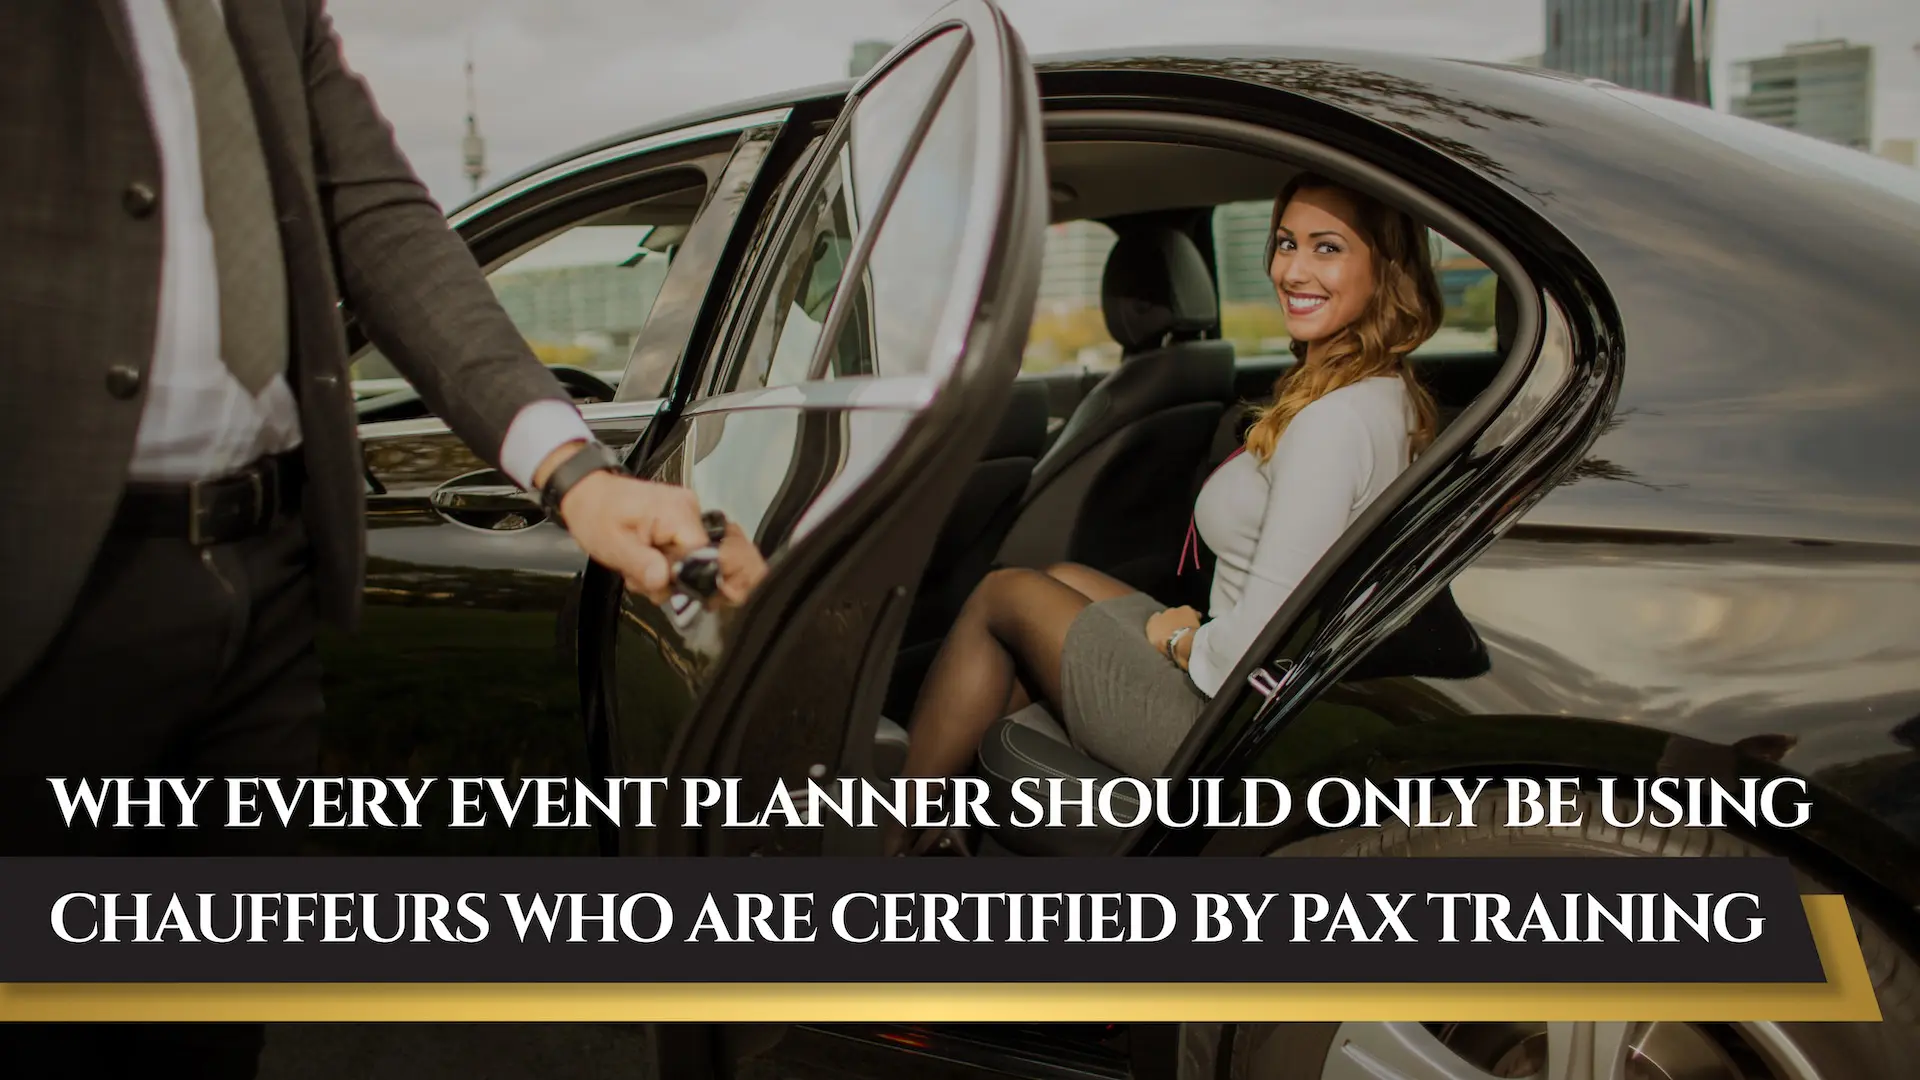 Why Every Event Planner Should Only Be Using Chauffeurs Who Are Certified by PAX Training - Blog Article Cover Image